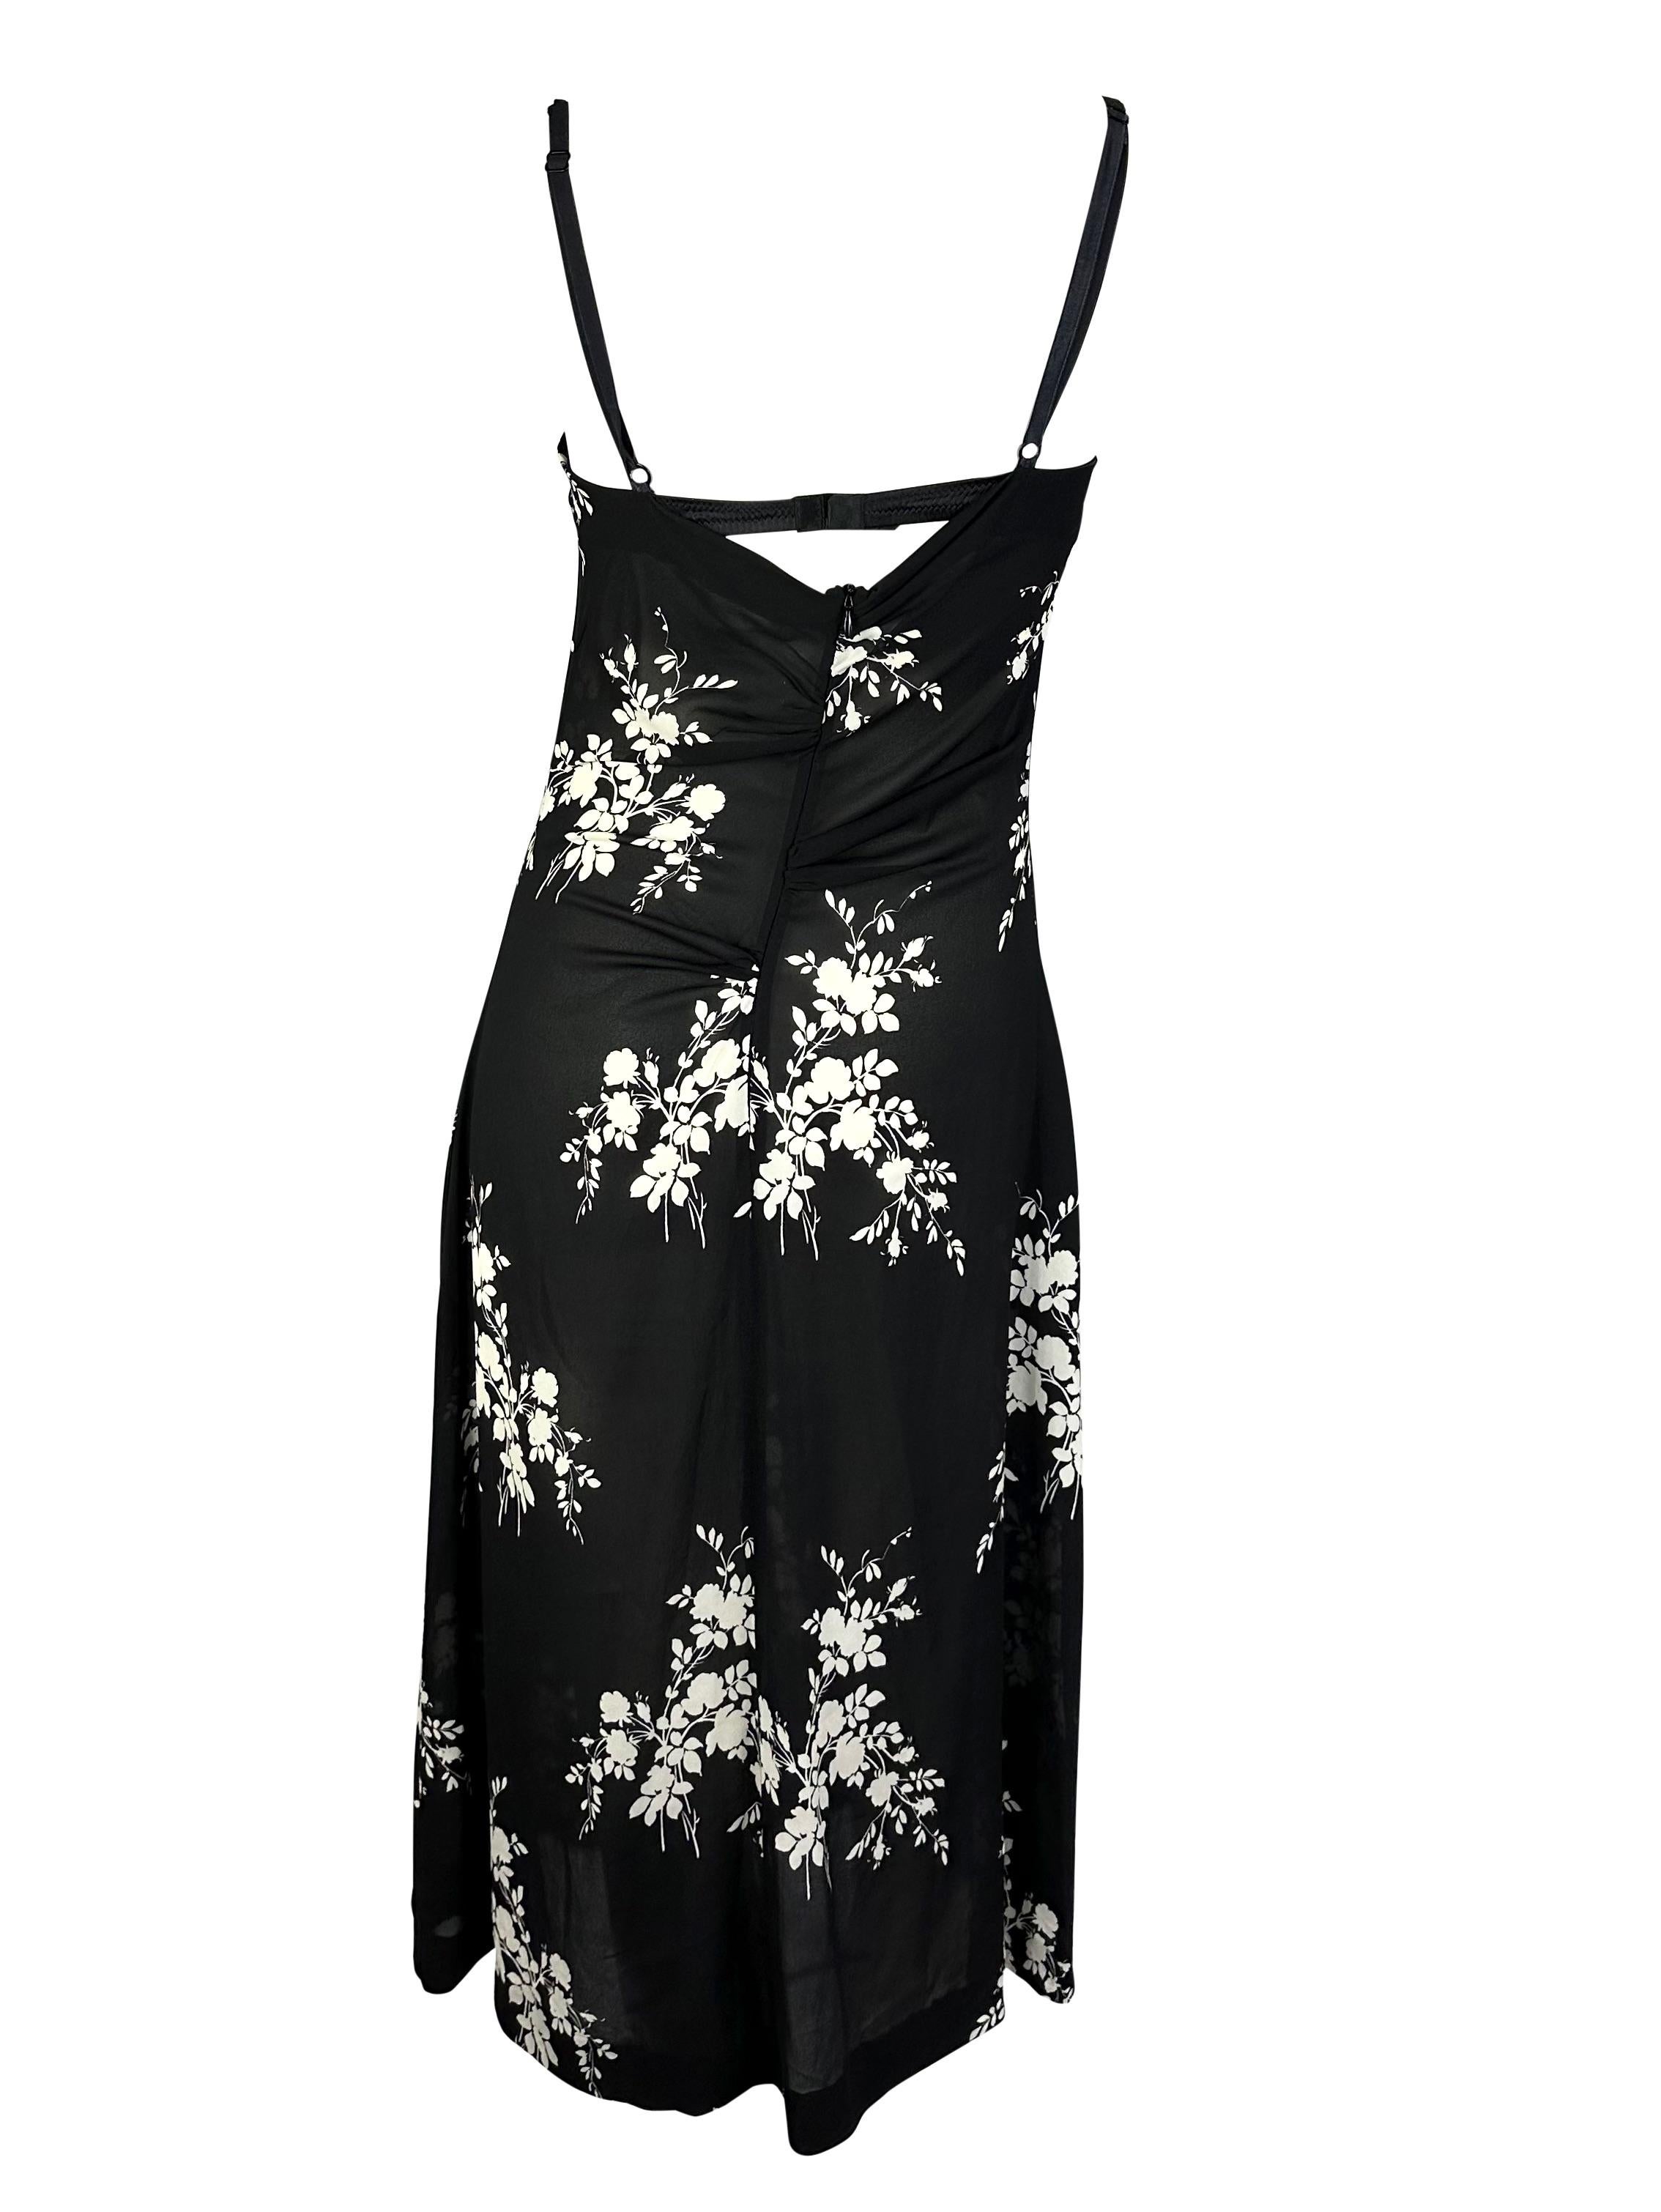 S/S 2002 Dolce & Gabbana Runway Sheer Black Stretch Silk Floral Bustier Dress In Excellent Condition In West Hollywood, CA